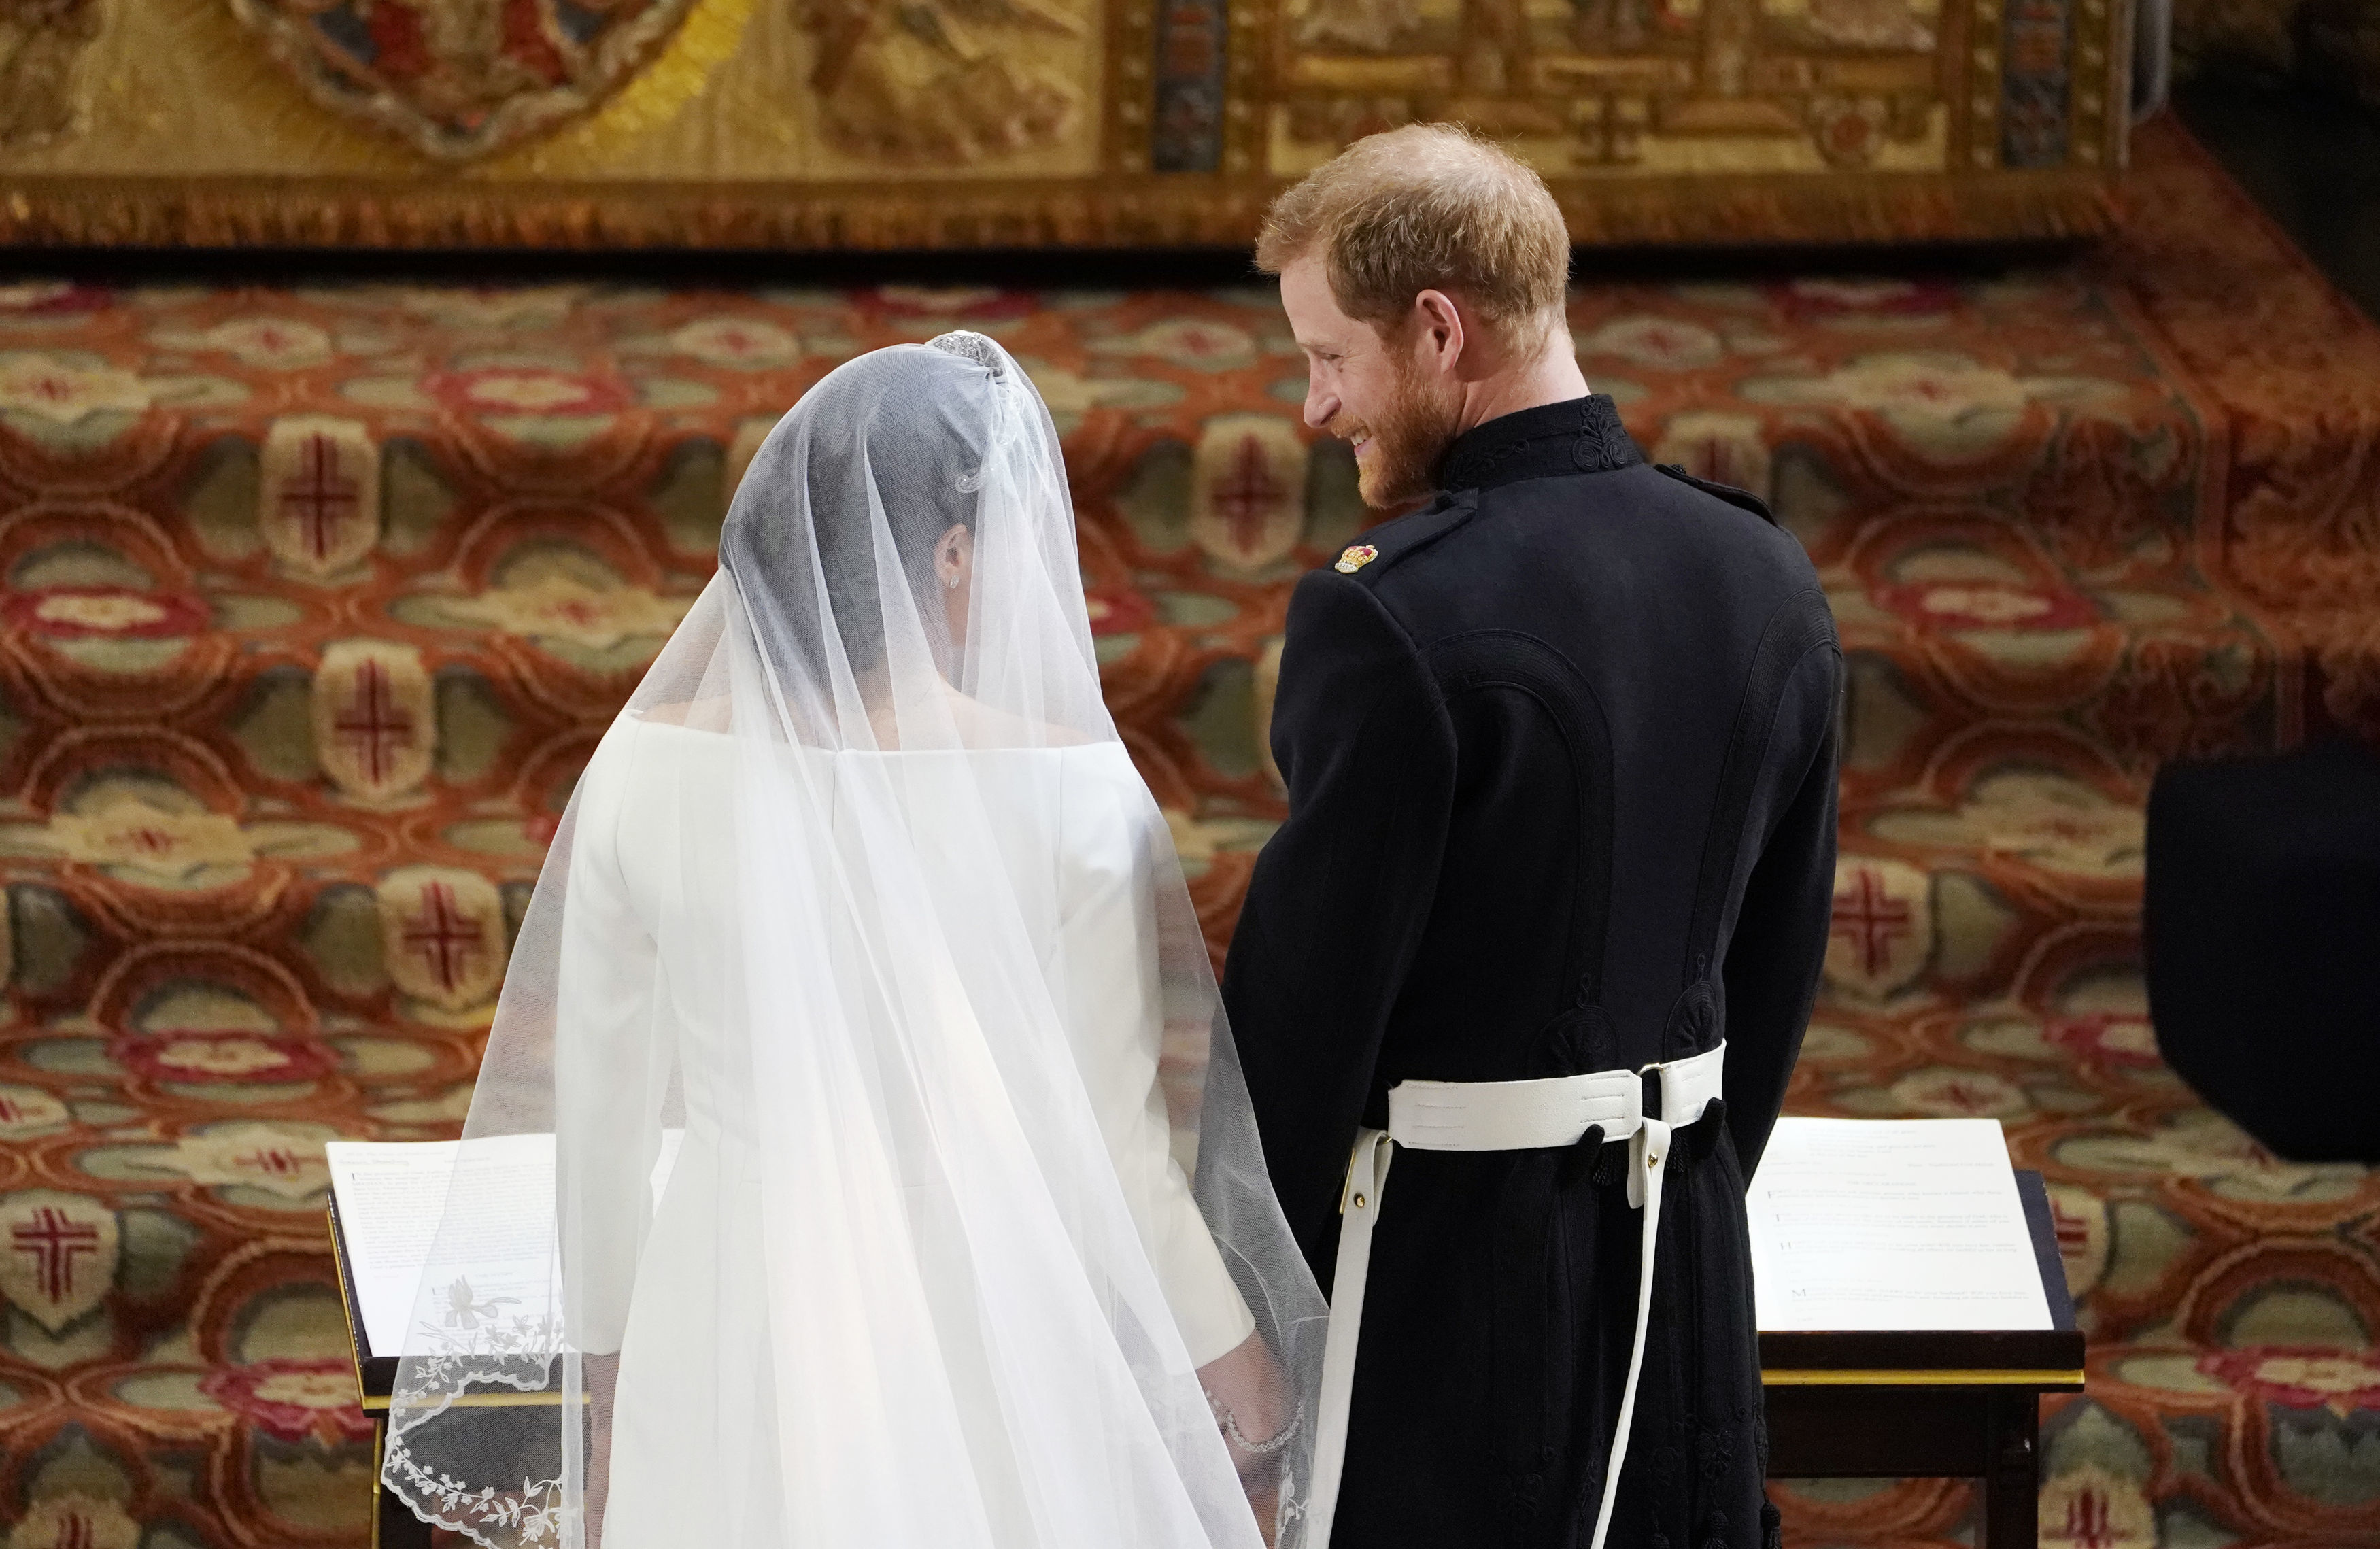 Prince Harry stands at the altar with Markle during the ceremony. (Owen Humphreys—AFP/Getty Images)